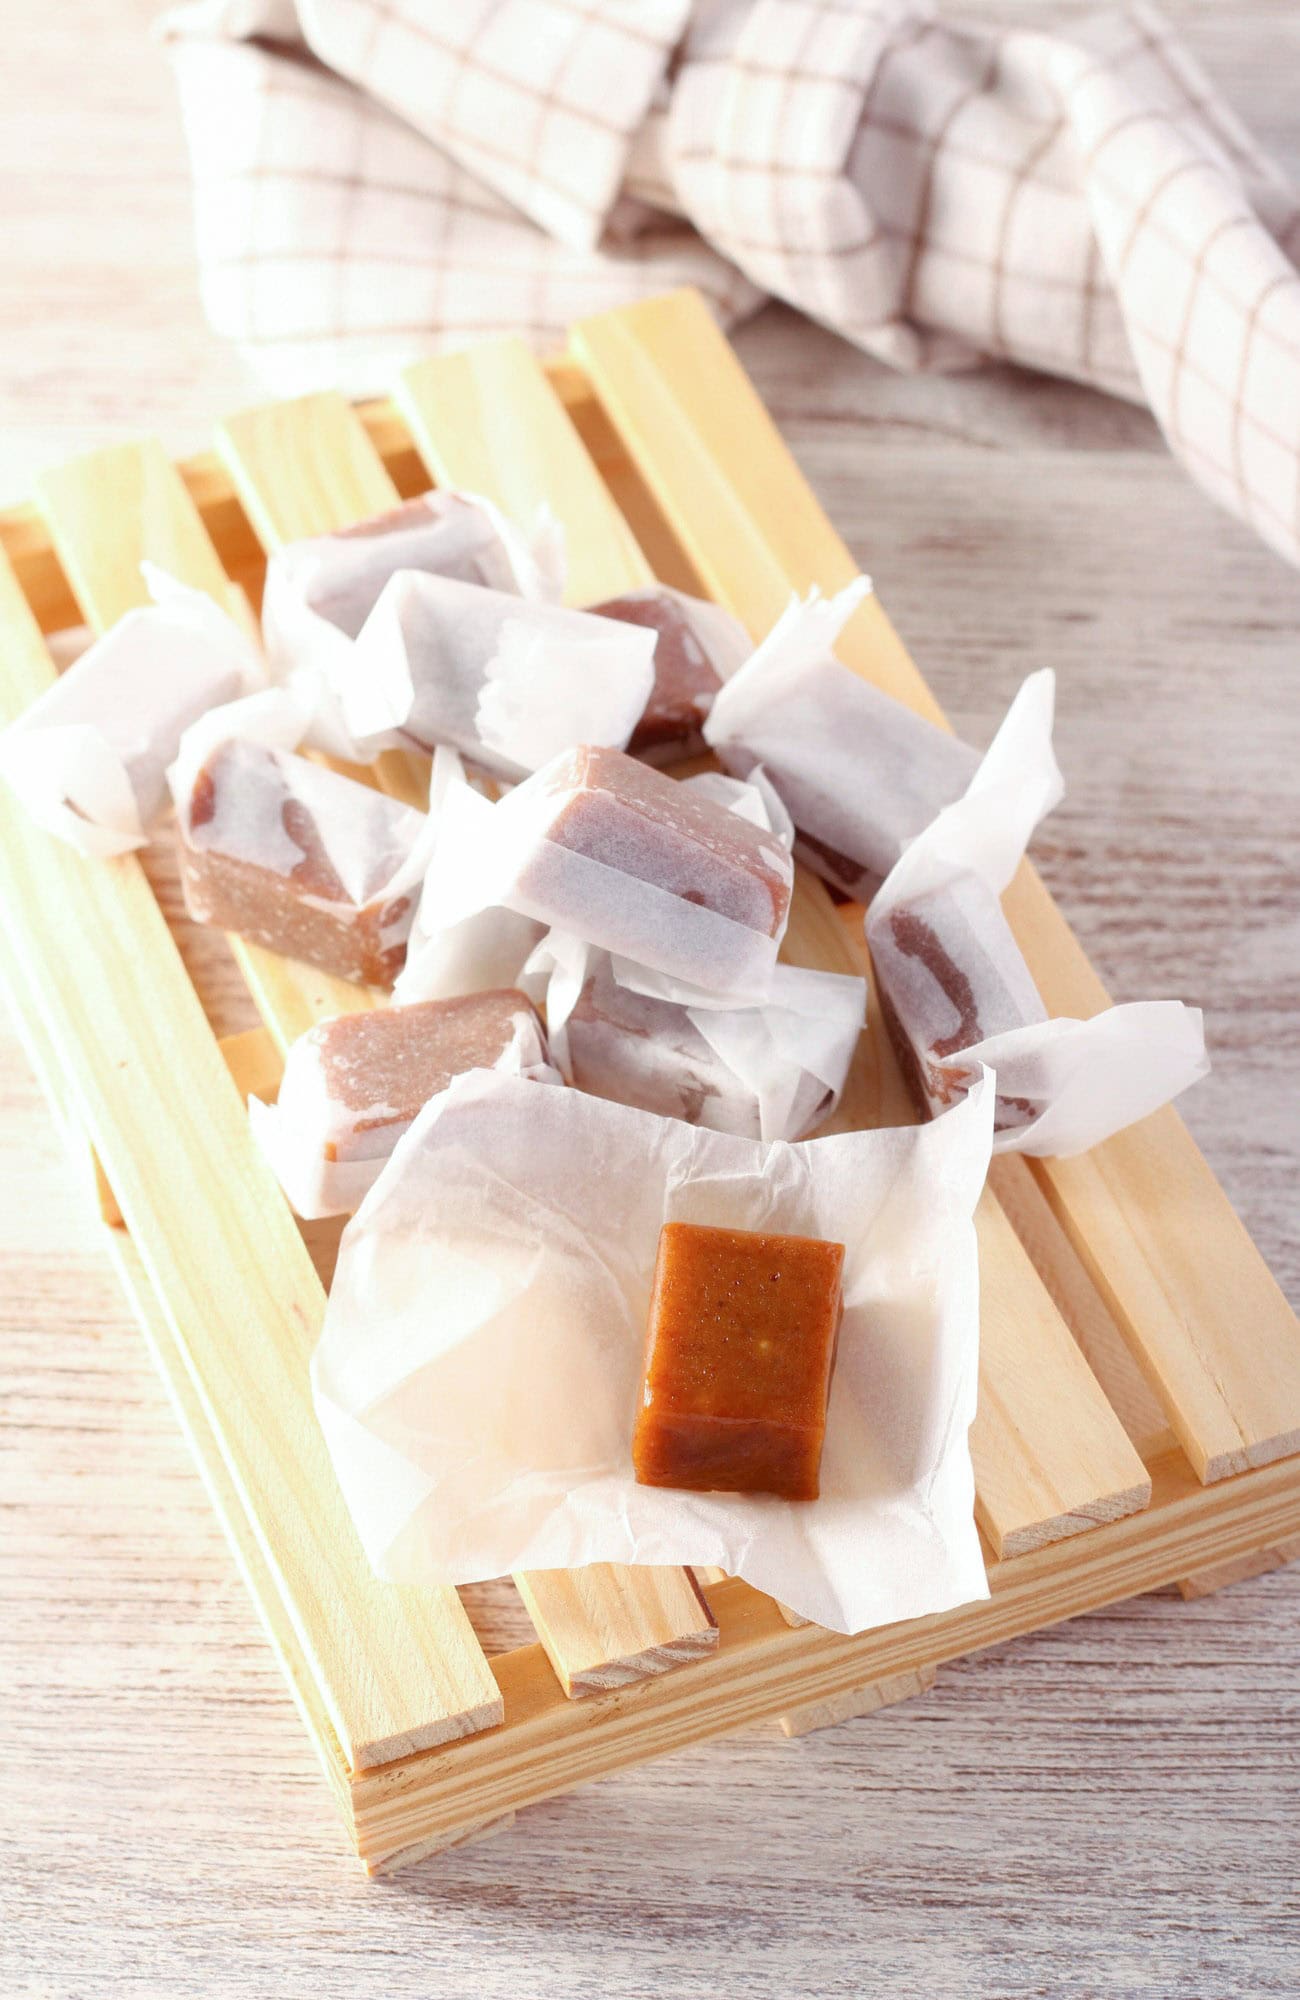 Homemade buttery dark brown sugar caramels wrapped in white paper, presented on a wooden tray with a checkered cloth in the background, on a wooden surface. There's an unwrapped caramel in focus at the front of the image.